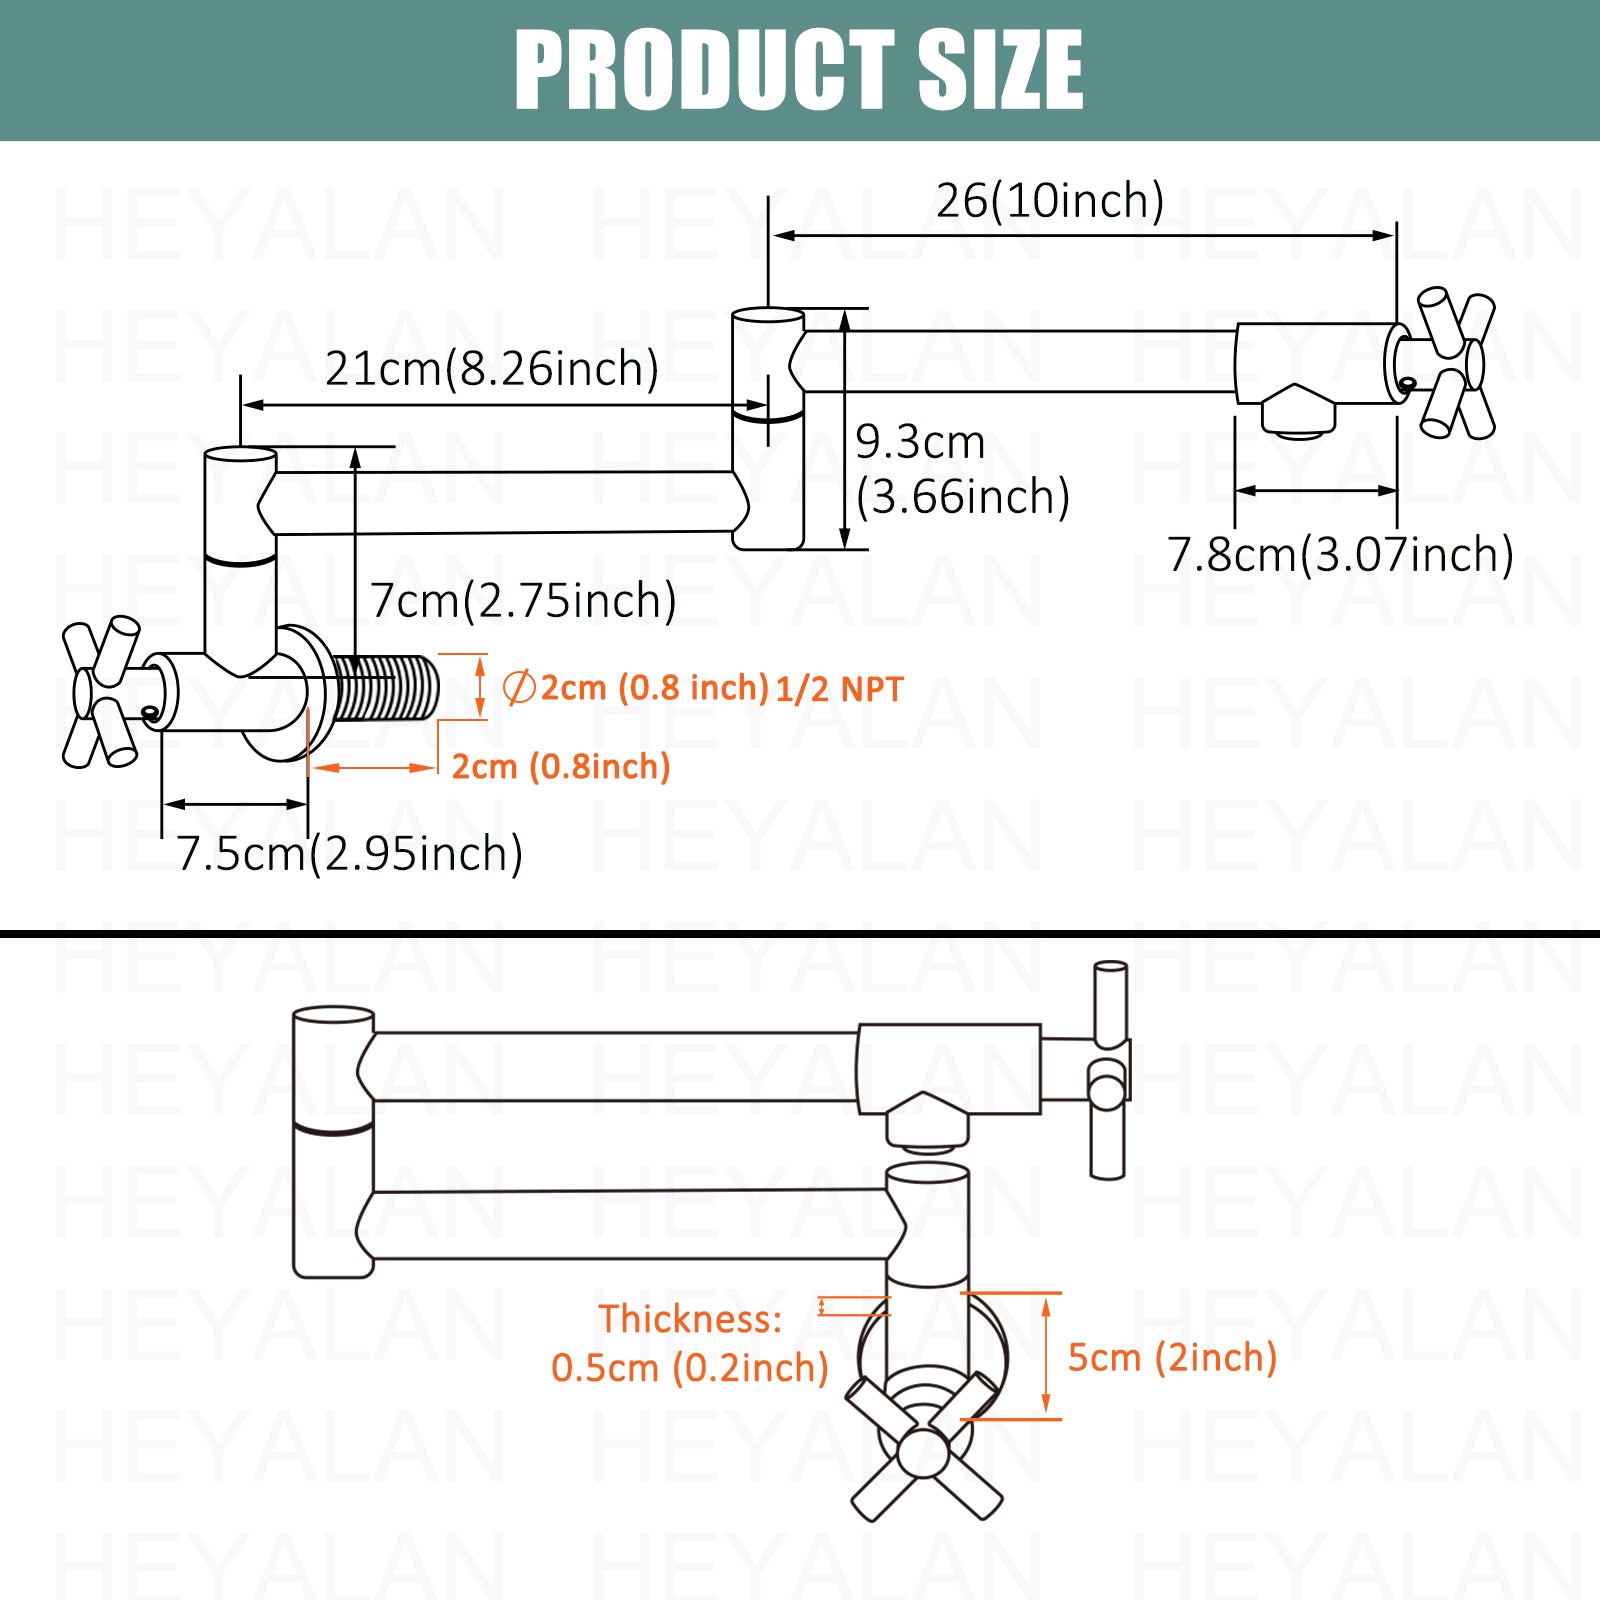 Heyalan Pot Filler Kitchen Faucet Stainless Steel SUS304 Two Cross Handle 19 Inch Single Hole Spout Wall Mounted Stretchable Swing Arm Commercial Kitchen Sink Faucet to Control Water